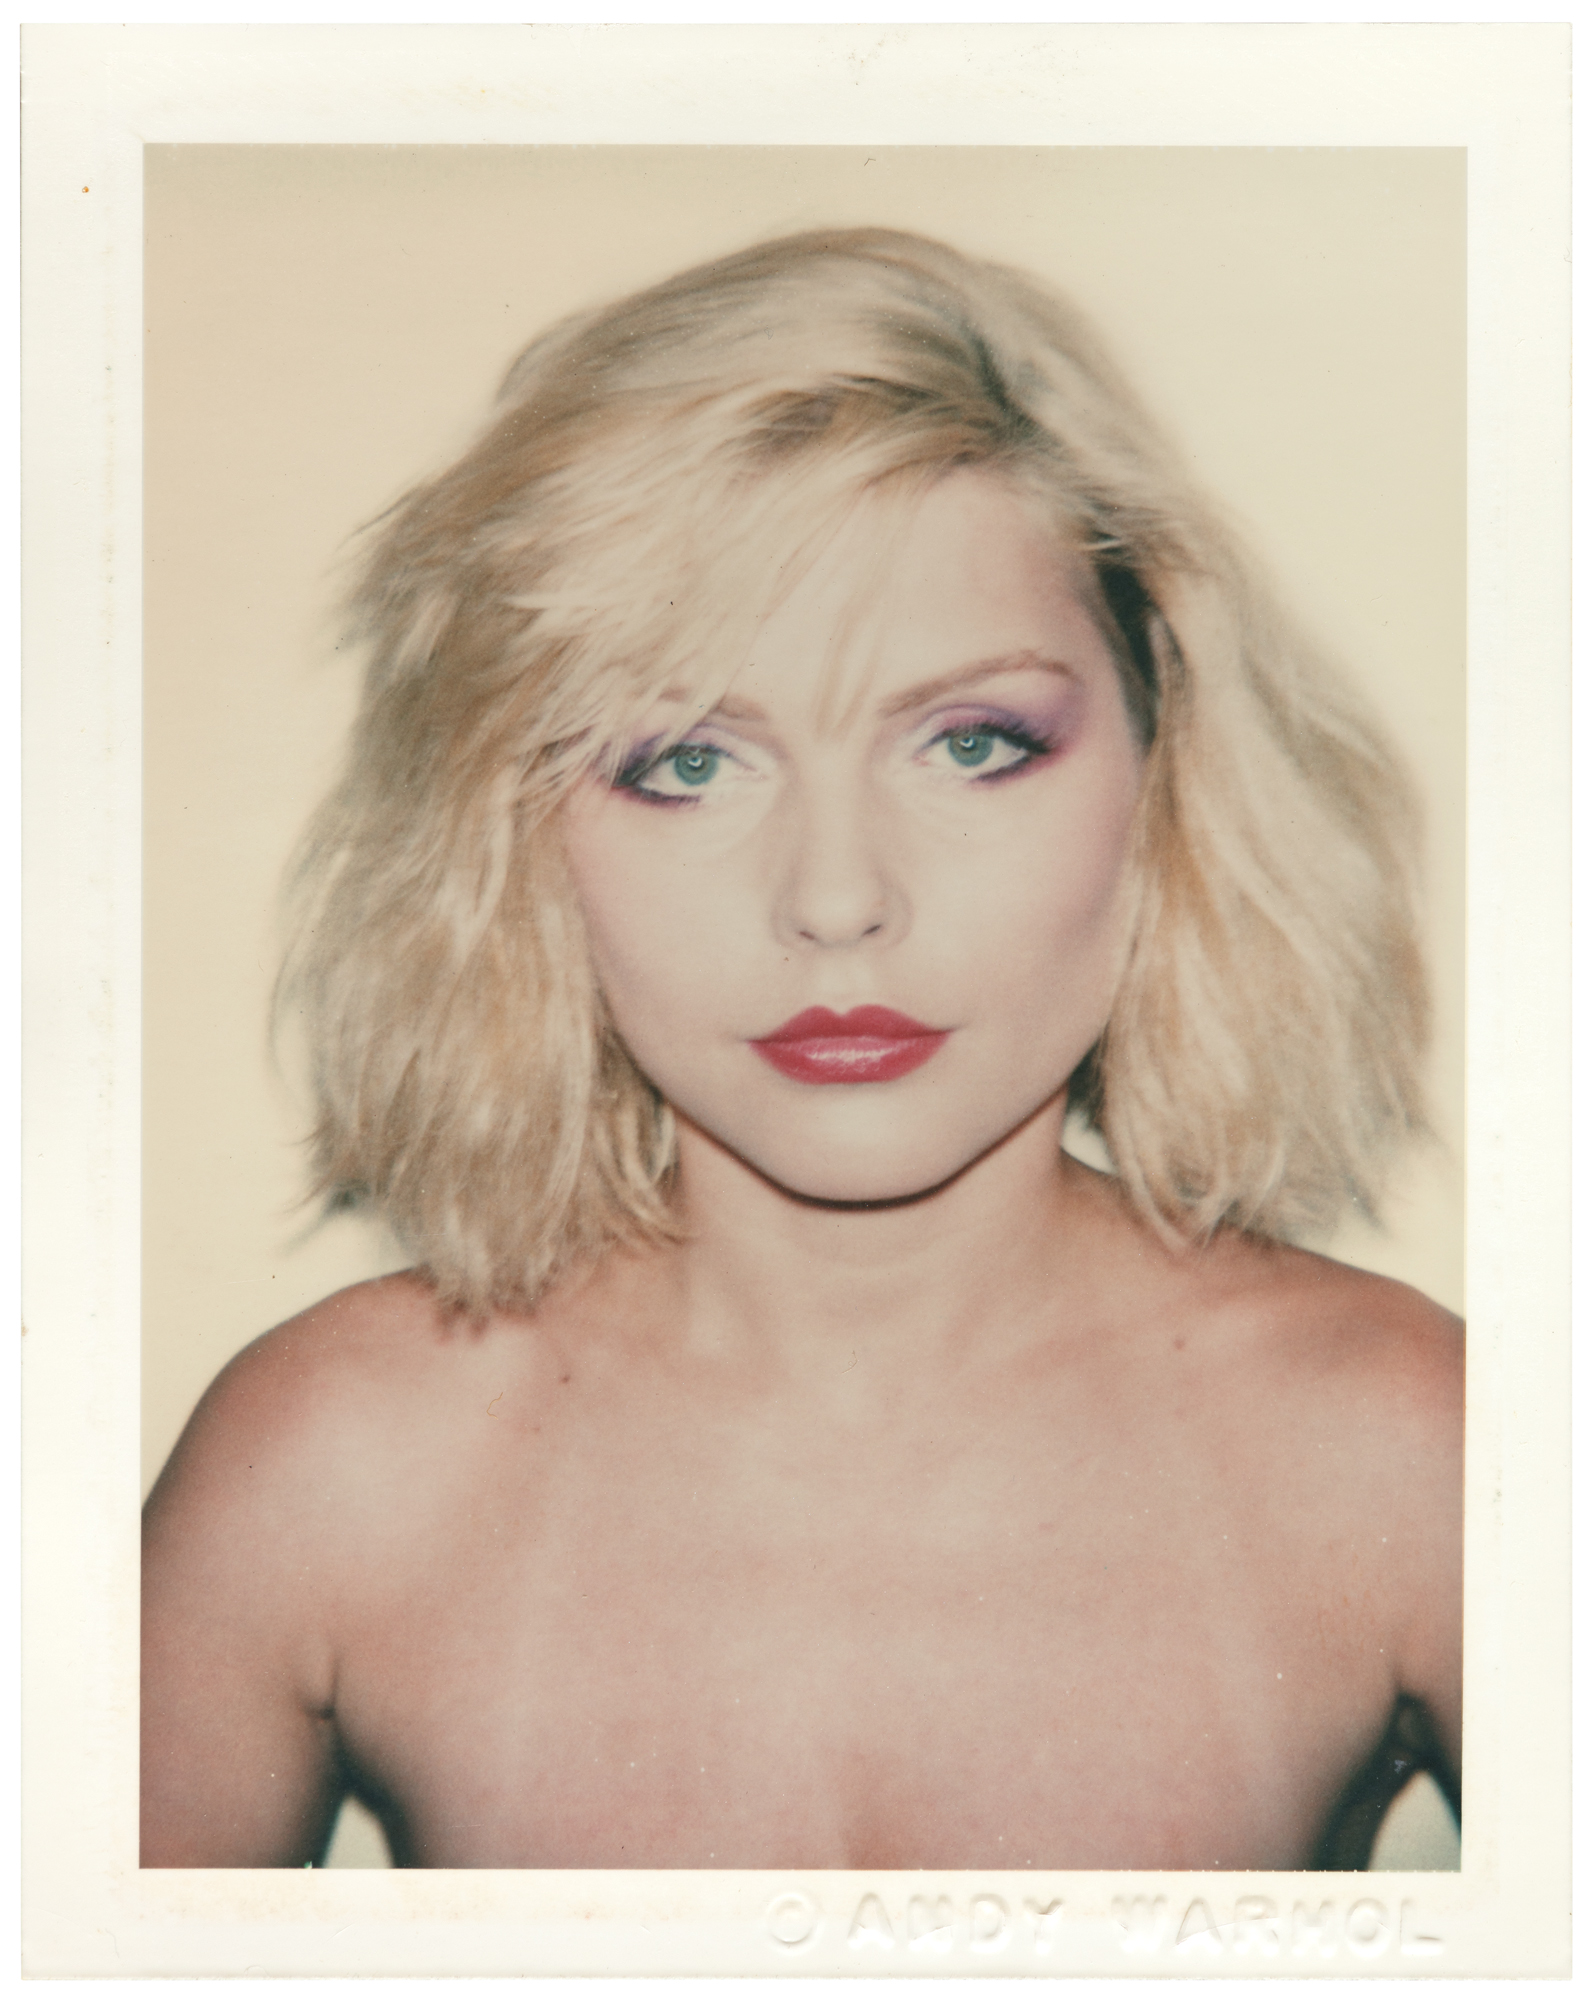 Andy Warhol, born Pittsburgh, Pennsylvania 1928, died New York City, New York 1987, <em>Debbie Harry</em>, 1980, New York, PolaroidTM Polacolor Type 108, 10.8 x 8.6 cm (sheet), 9.7 x 7.3 (image); V.B. F. Young Bequest Fund and d’Auvergne Boxall Bequest Fund 2018, Art Gallery of South Australia, Adelaide, © Andy Warhol Foundation for the Visual Arts, Inc. ARS/Copyright Agency